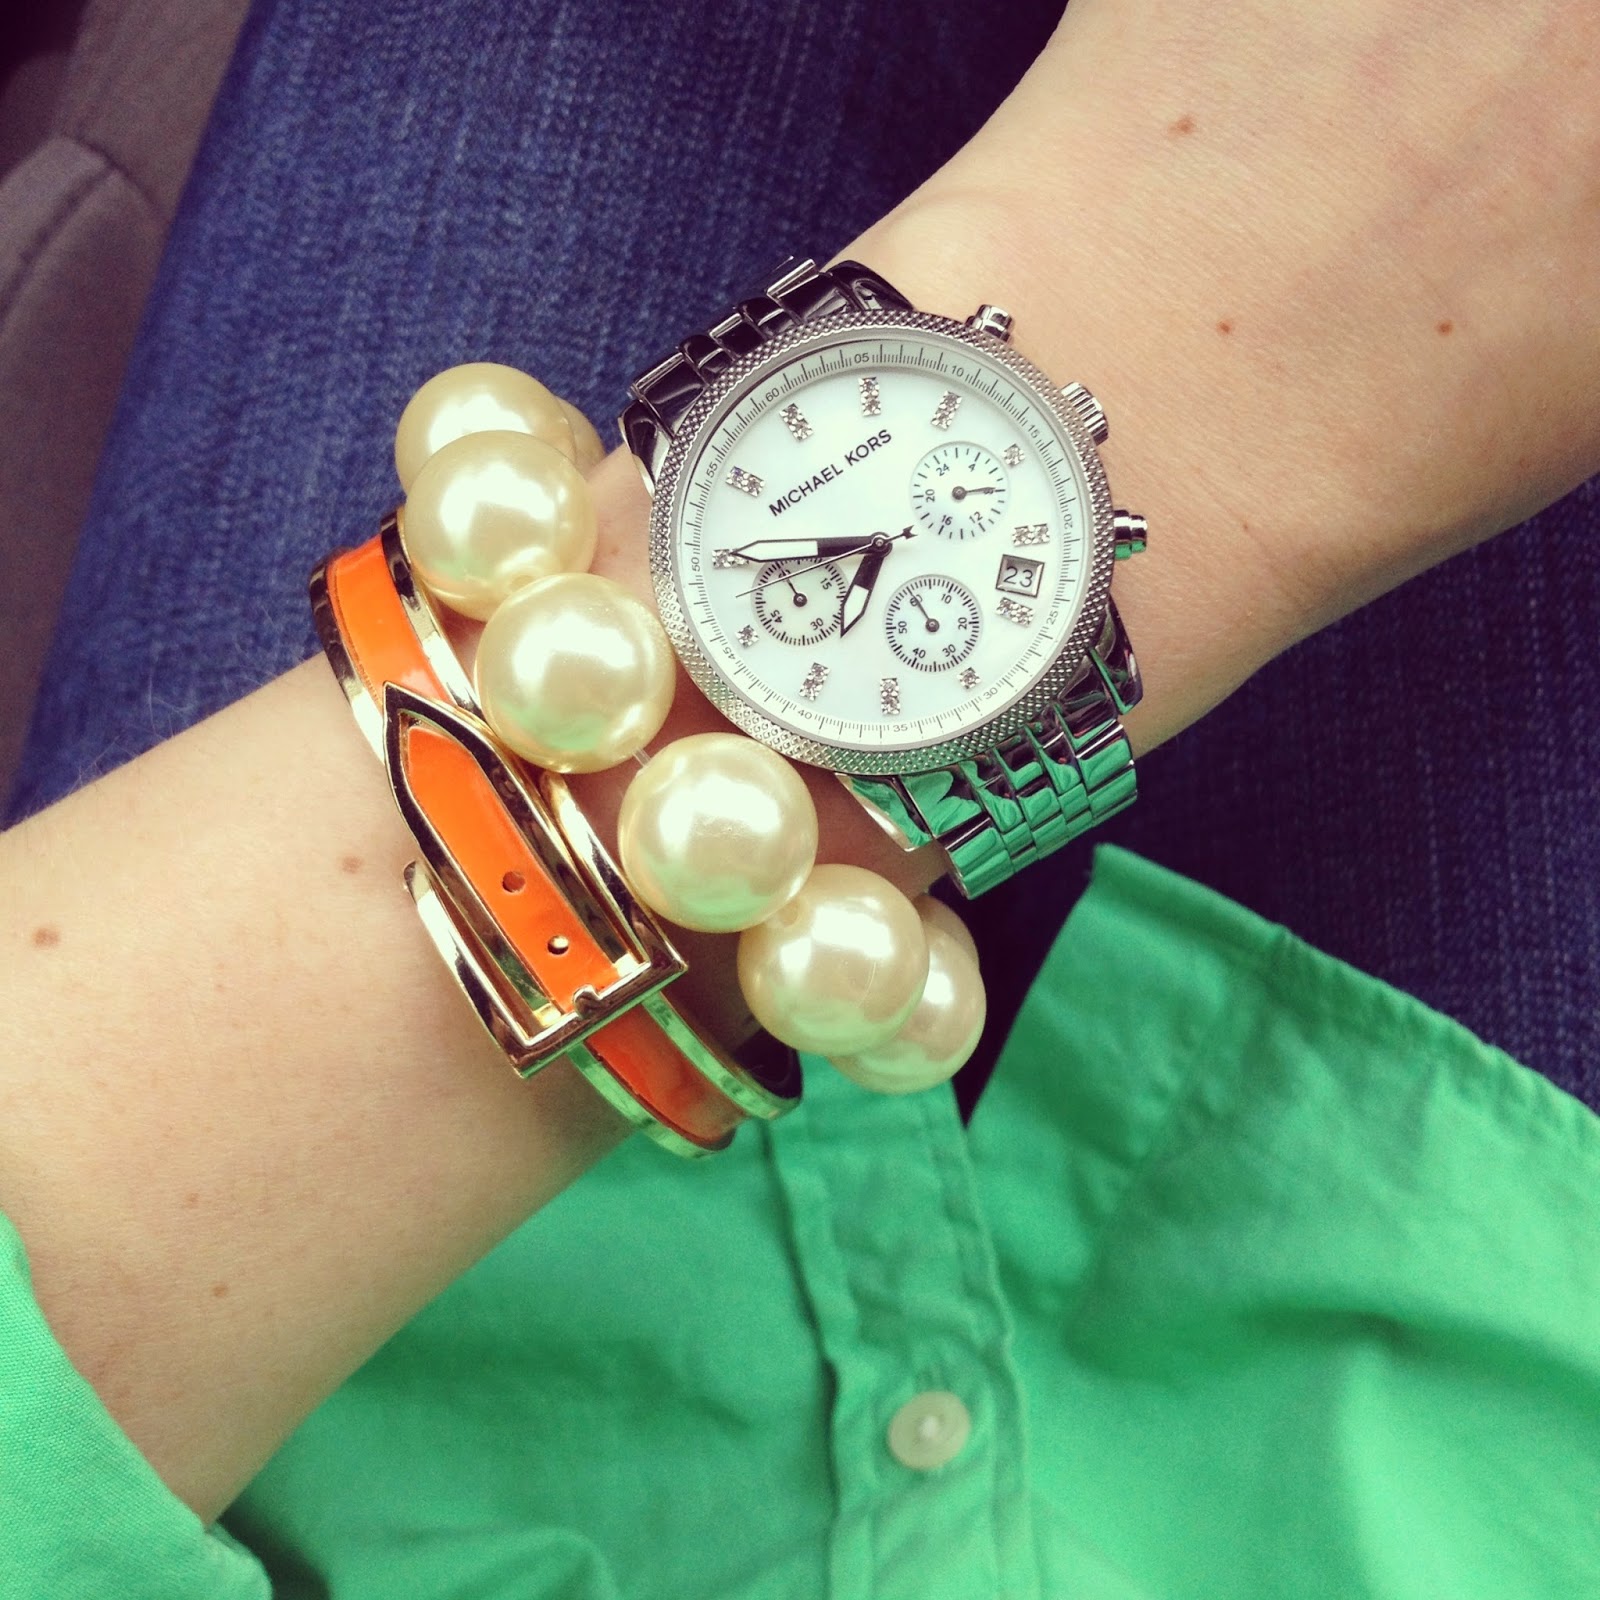 #Day 66 - Friday morning #armcandy